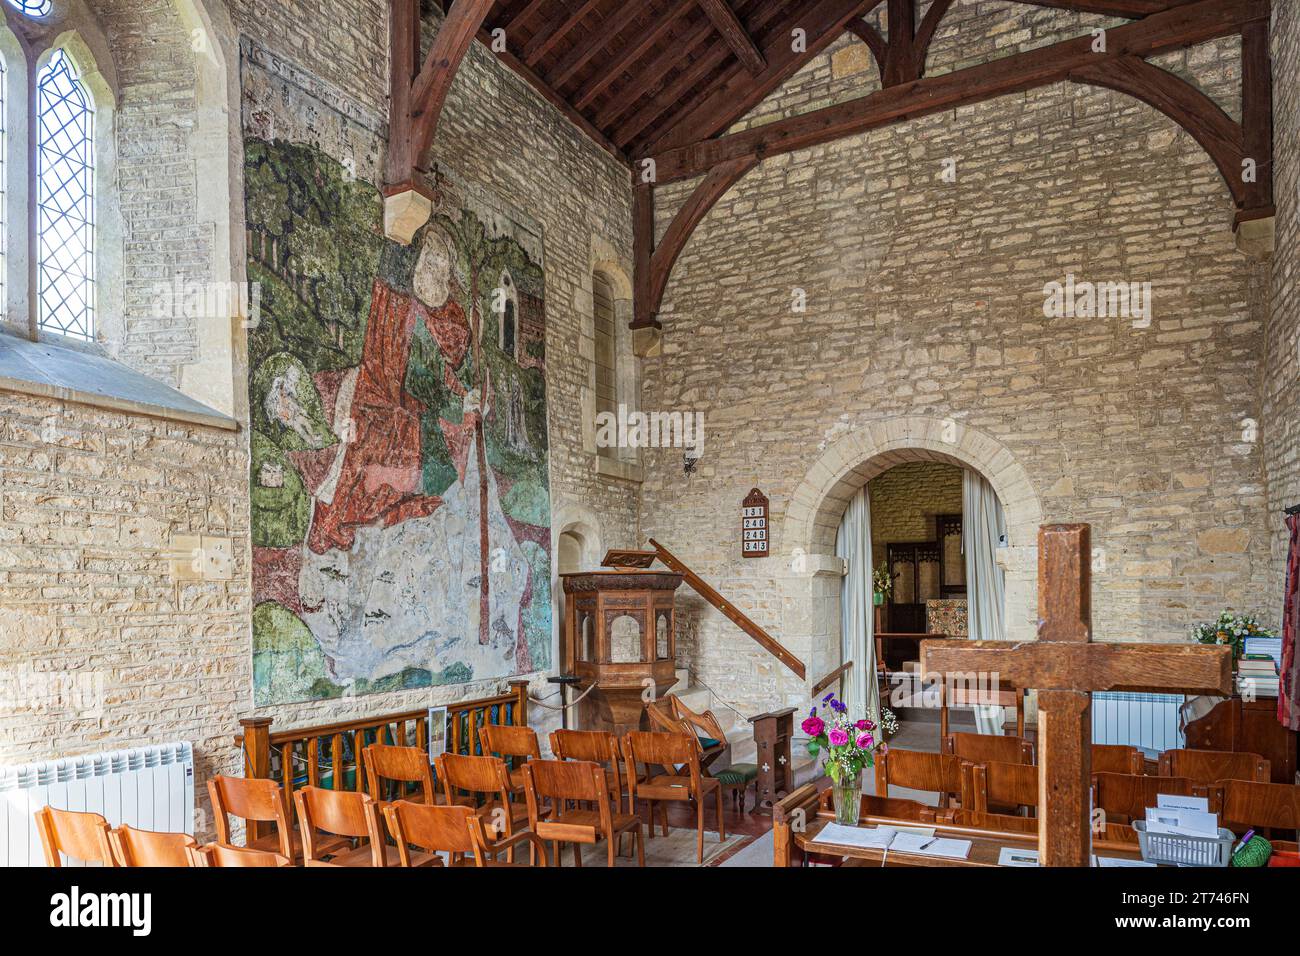 14th century wall painting of St Christopher in the 12th century church of St Mary Magdalene in the Cotswold village of Baunton, Gloucestershire UK Stock Photo